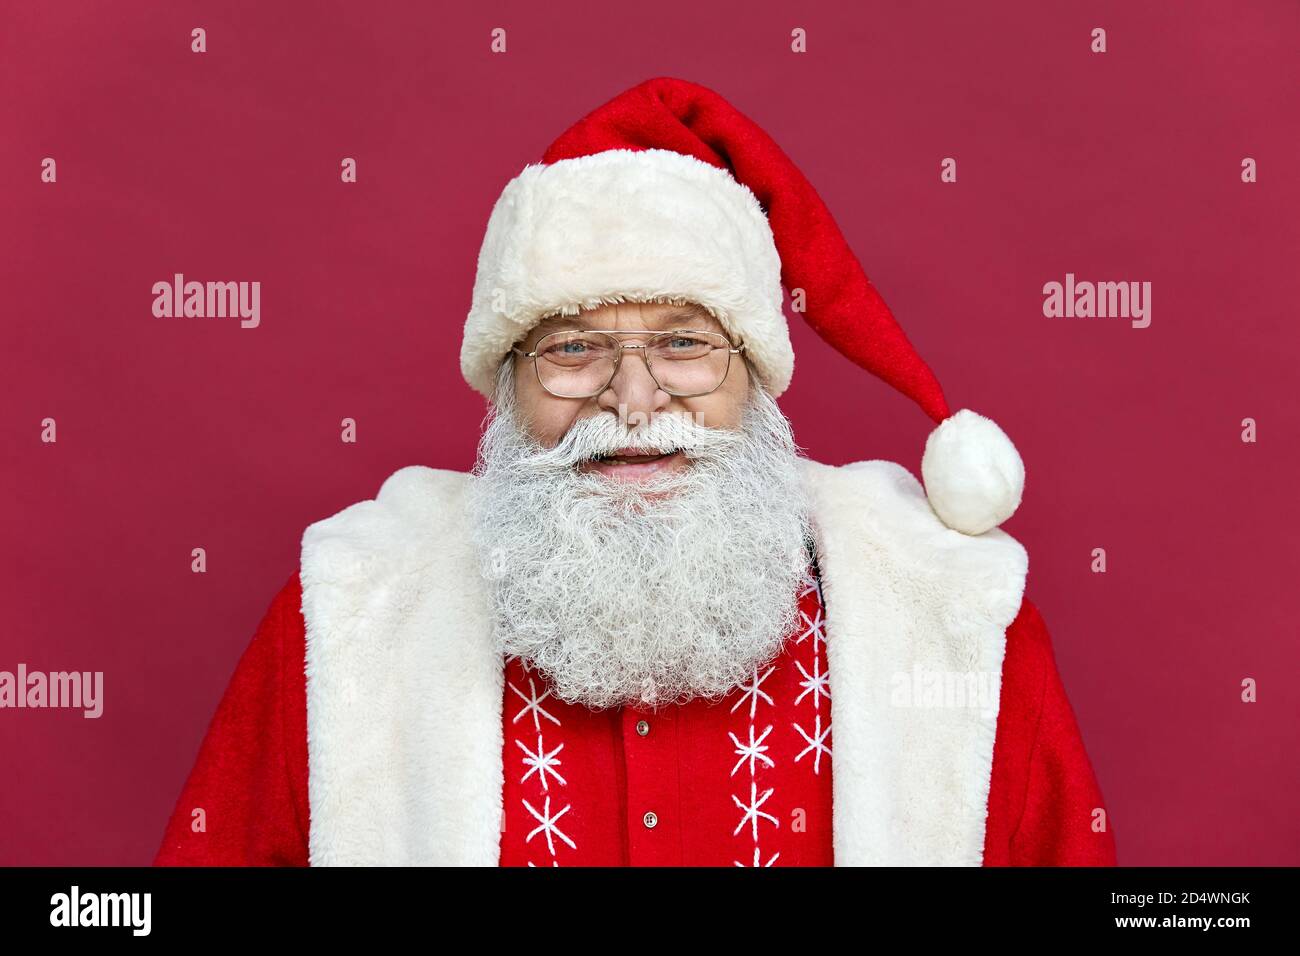 Happy old Santa Claus looking at camera standing on red background, headshot. Stock Photo